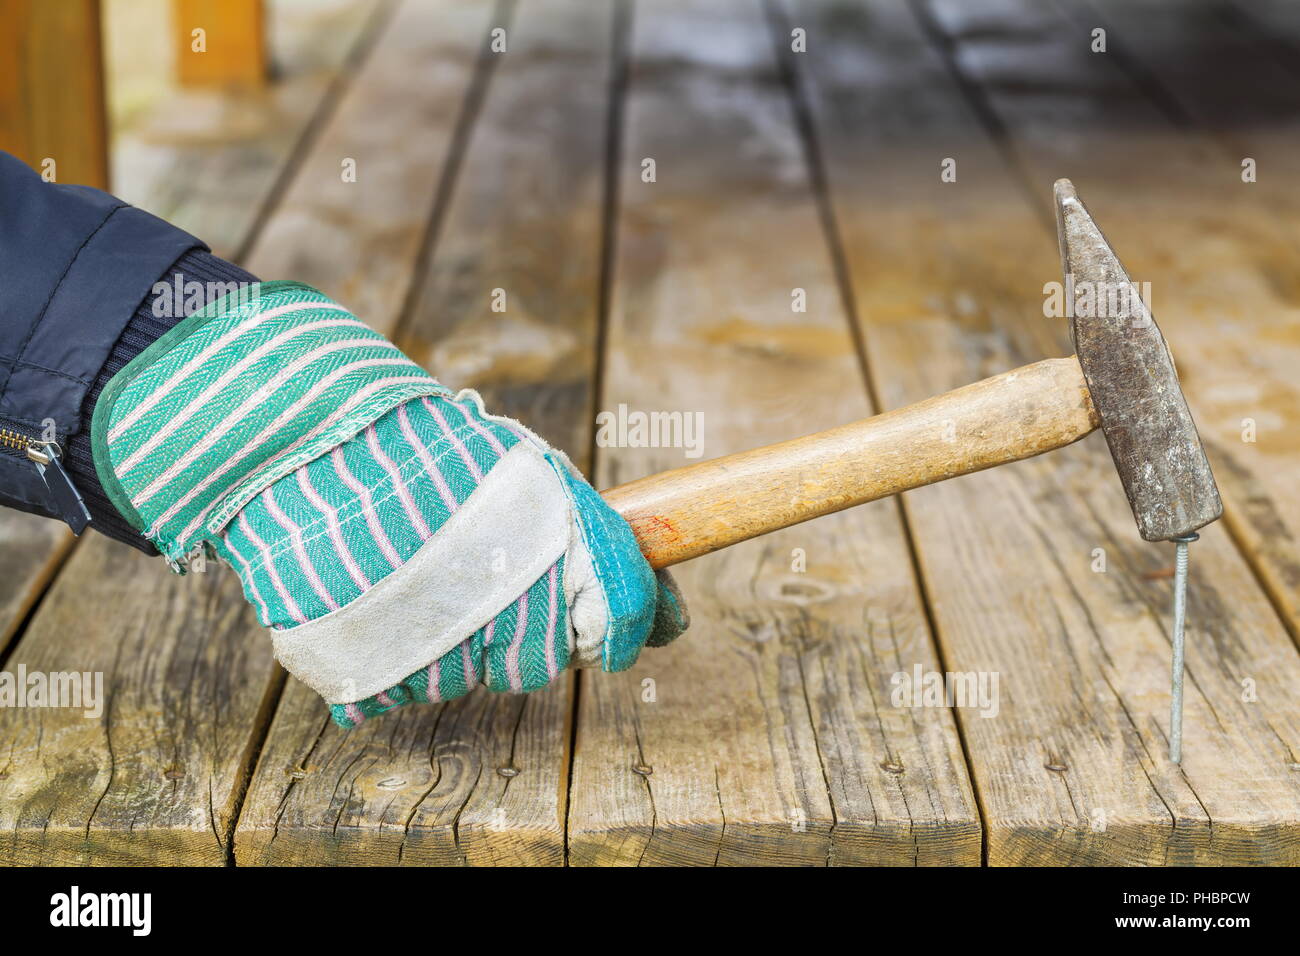 Worker hammering nail in wooden board Stock Photo